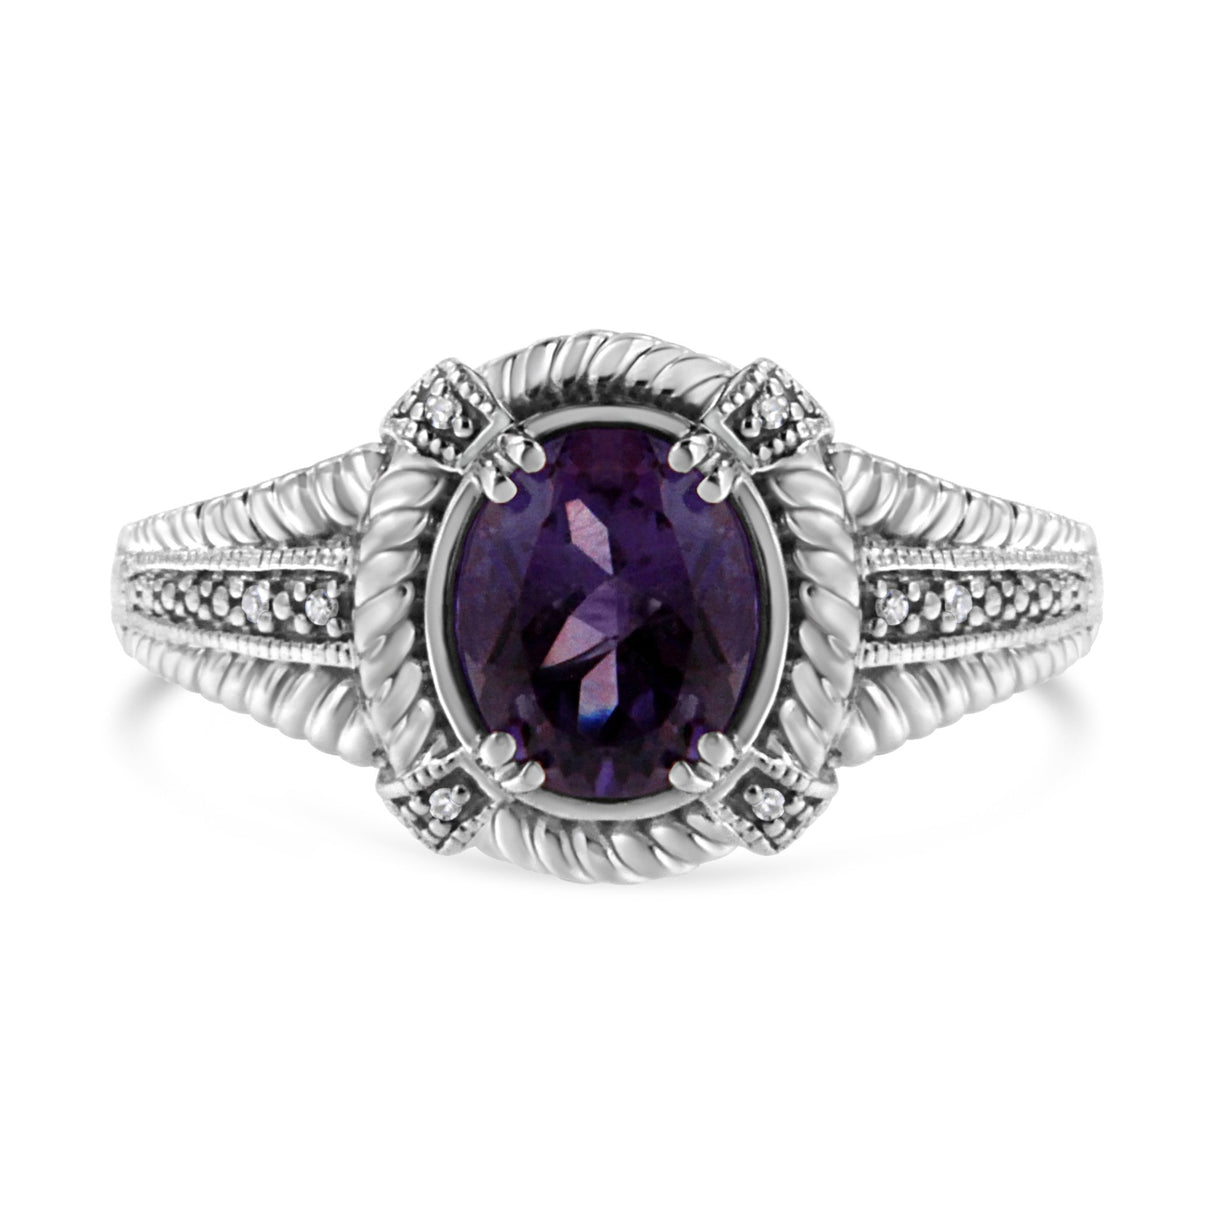 .925 Sterling Silver Prong Set Natural Oval Shape 9X7 Mm Purple Amethyst Solitaire And Diamond Accent Ring (I-J Color, I1-I2 Clarity) - Ring Size 8 - Tuesday Morning-Rings